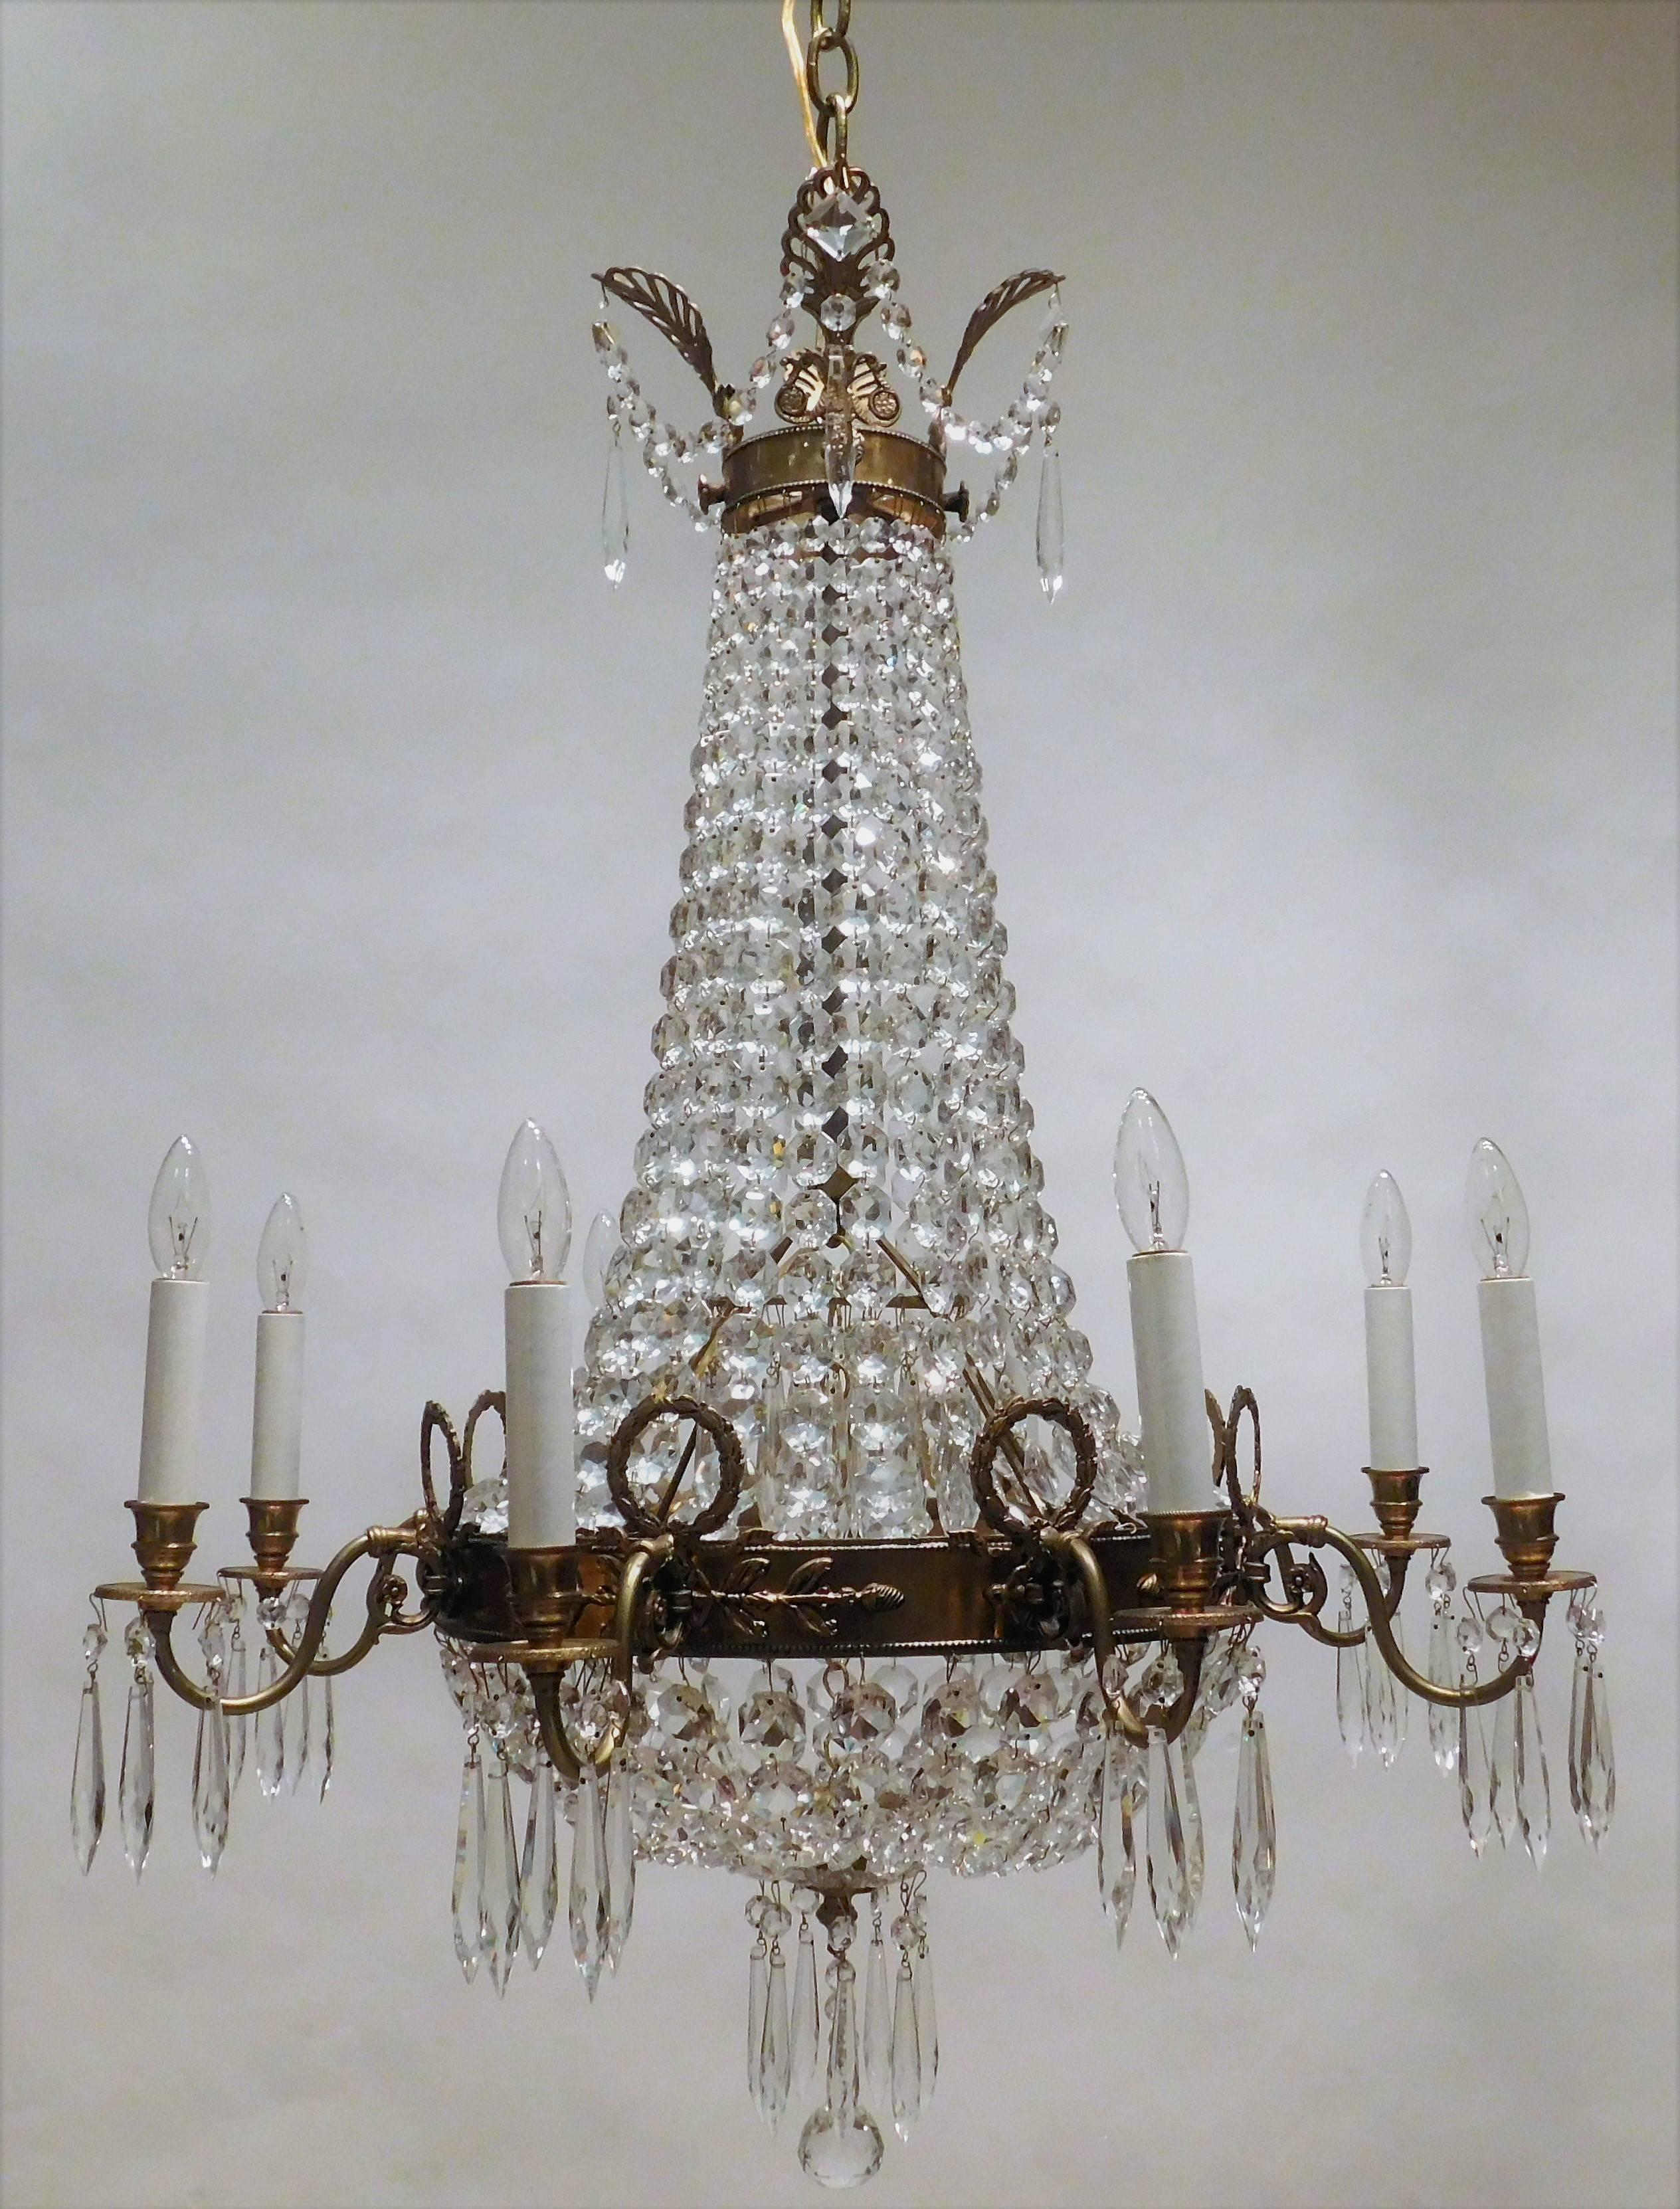 This chandelier was handmade of cast gilt brass with lead crystal. Tent and cascade design, bell shaped. Finely wrought laurel wreaths and acanthus leaf details. Ceiling cap, 1 foot of chain and hanging hardware included.